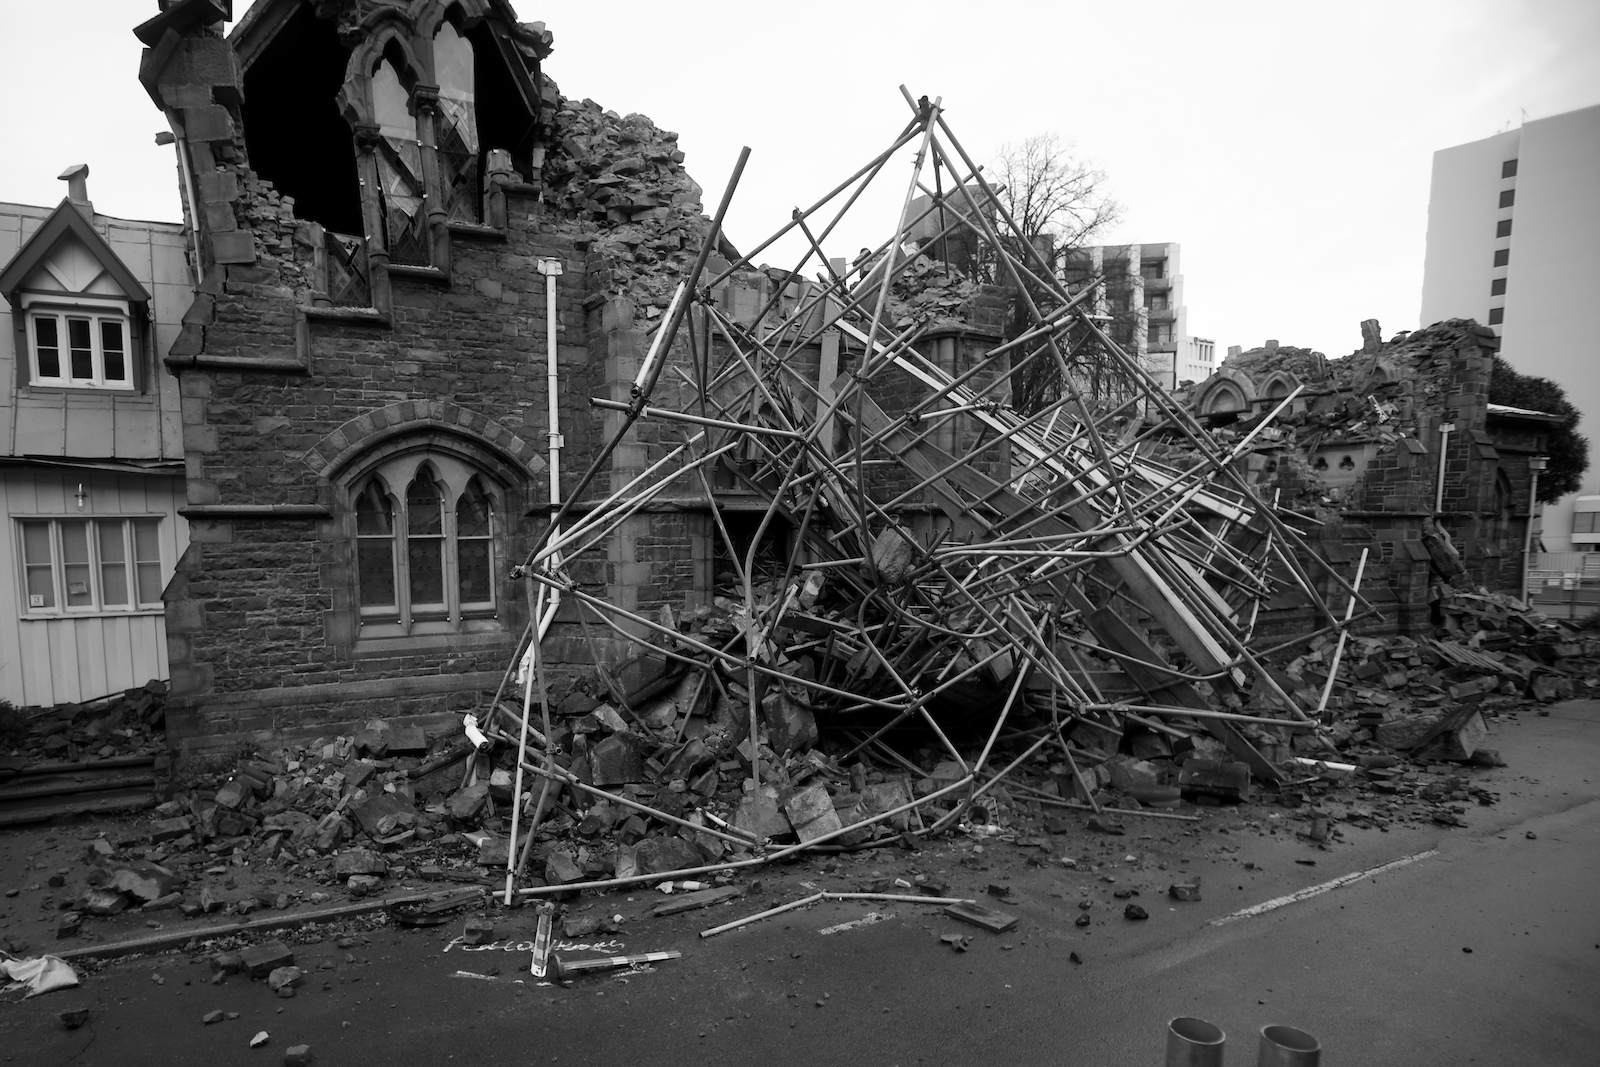 Damage after the Christchurch earthquake, photo by Ivan Woods.